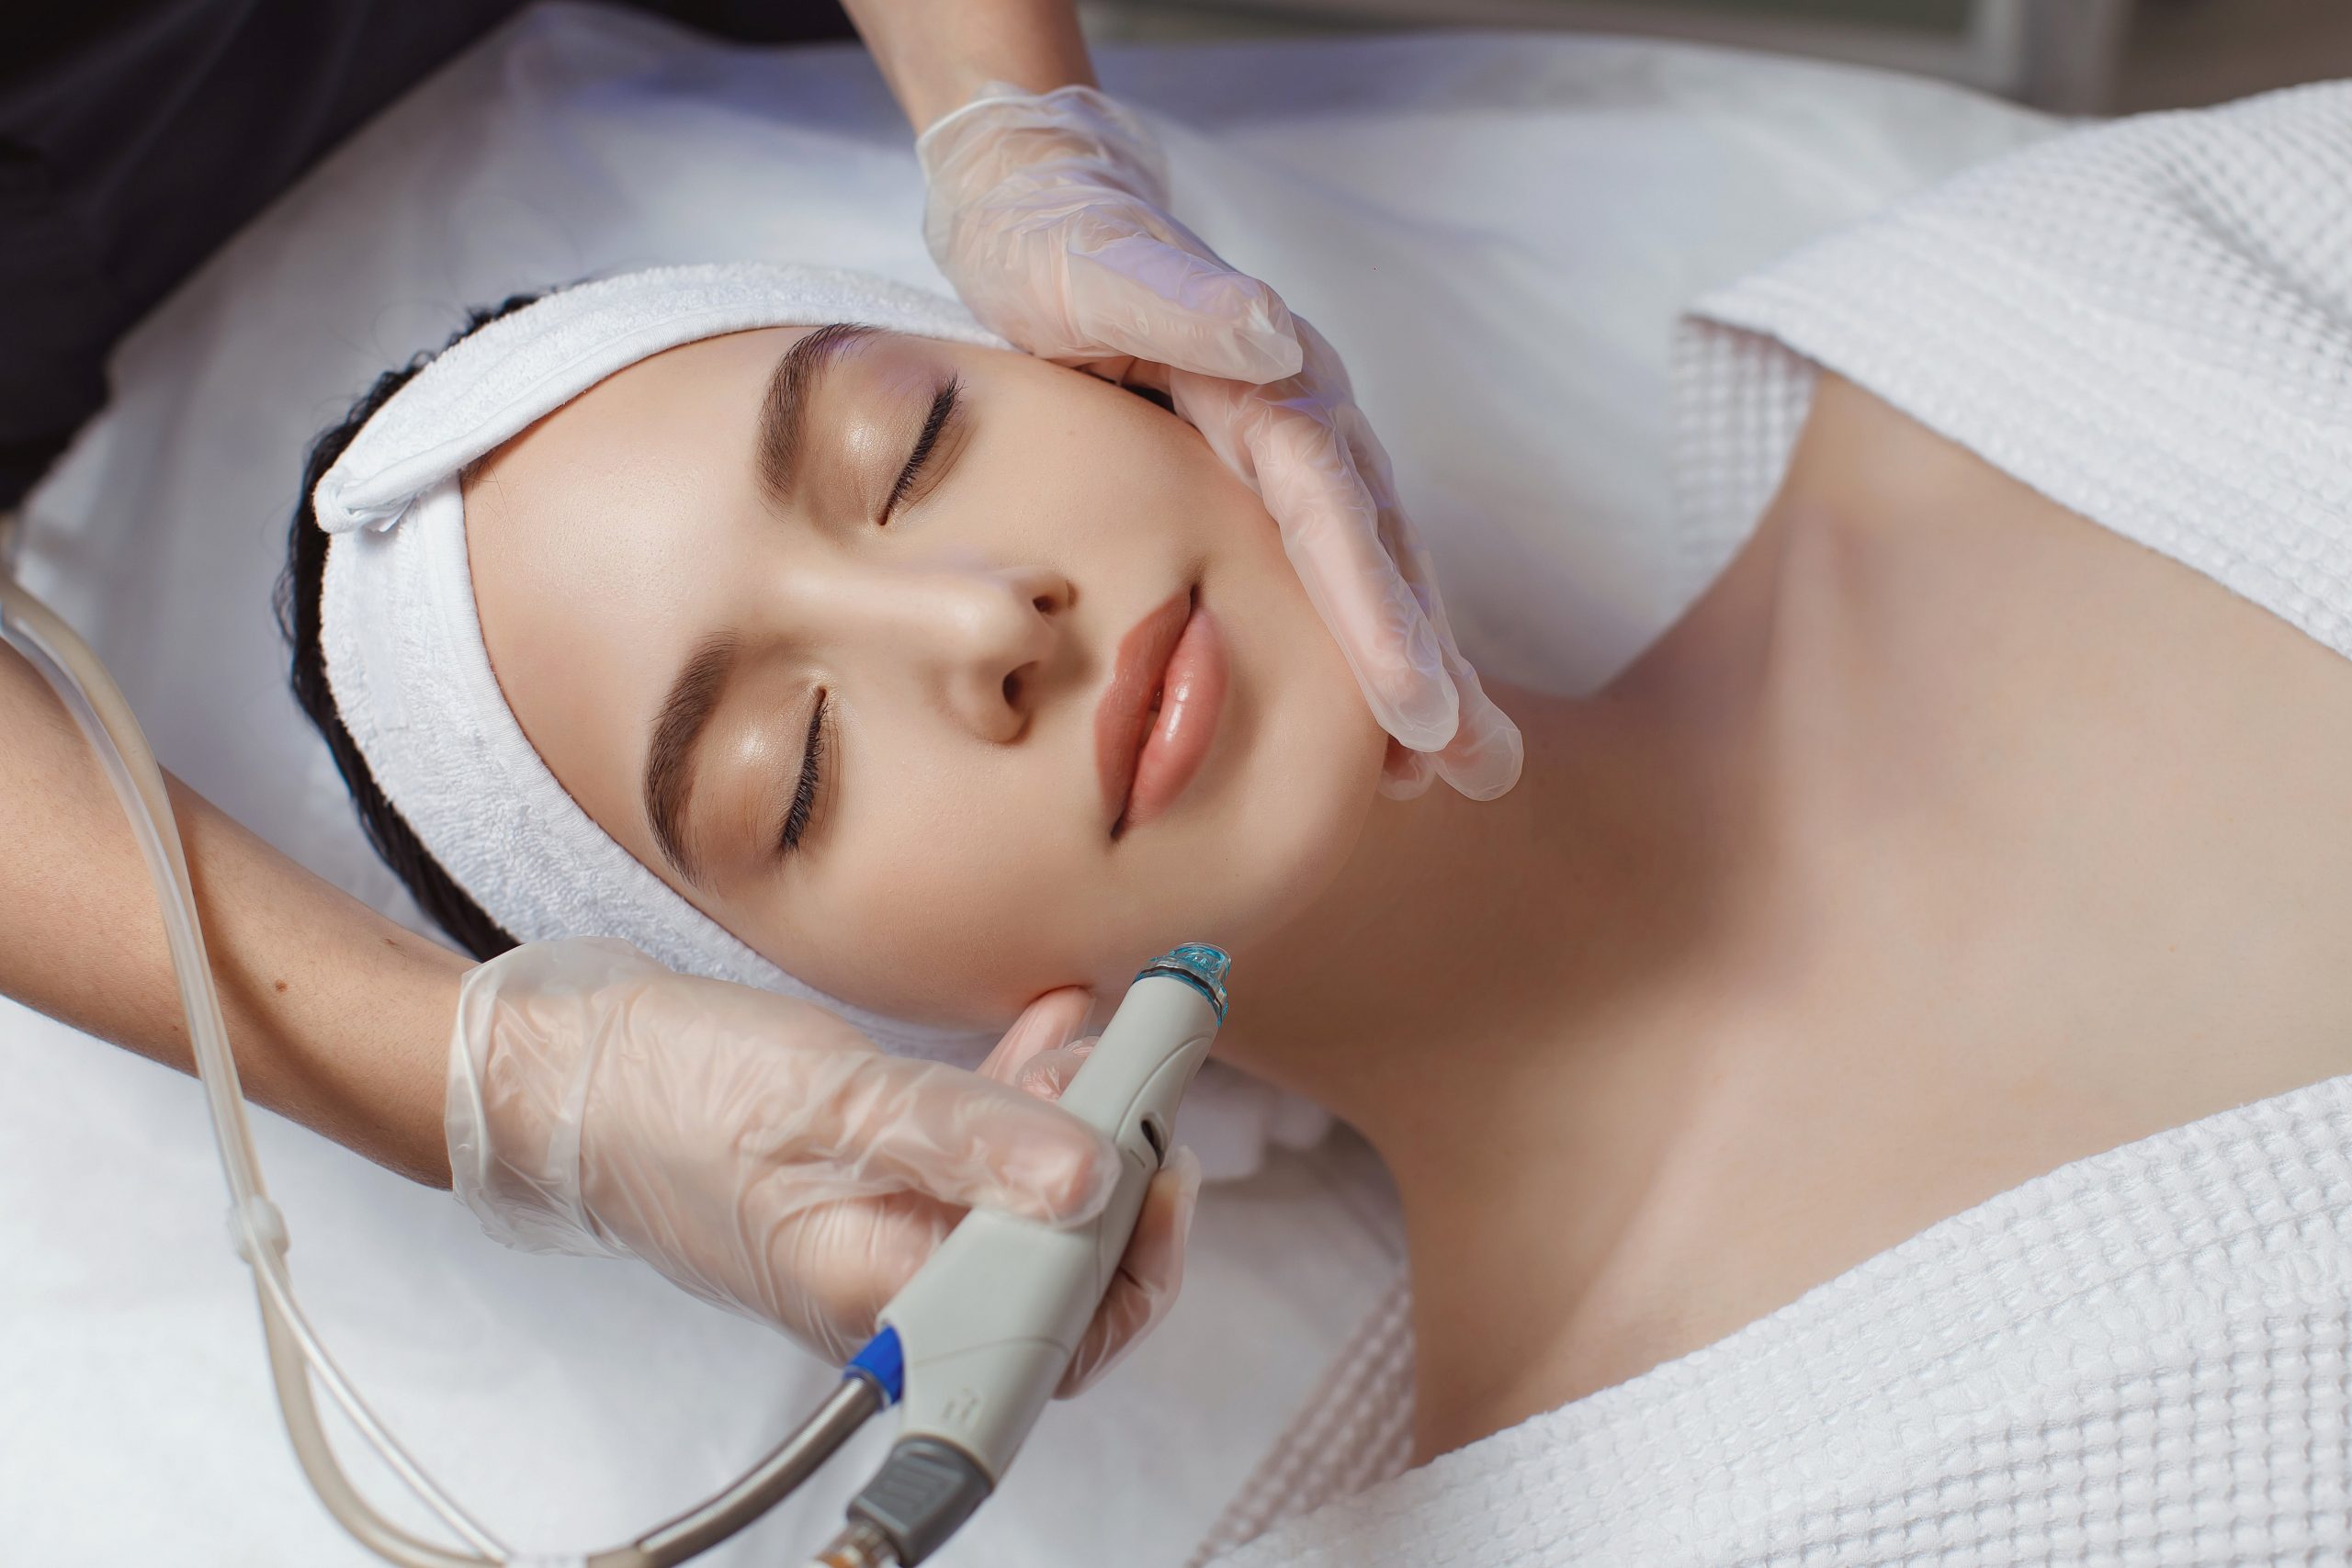 Know the Benefits of HydraFacial That Is Way More Than an Ordinary Facial 3